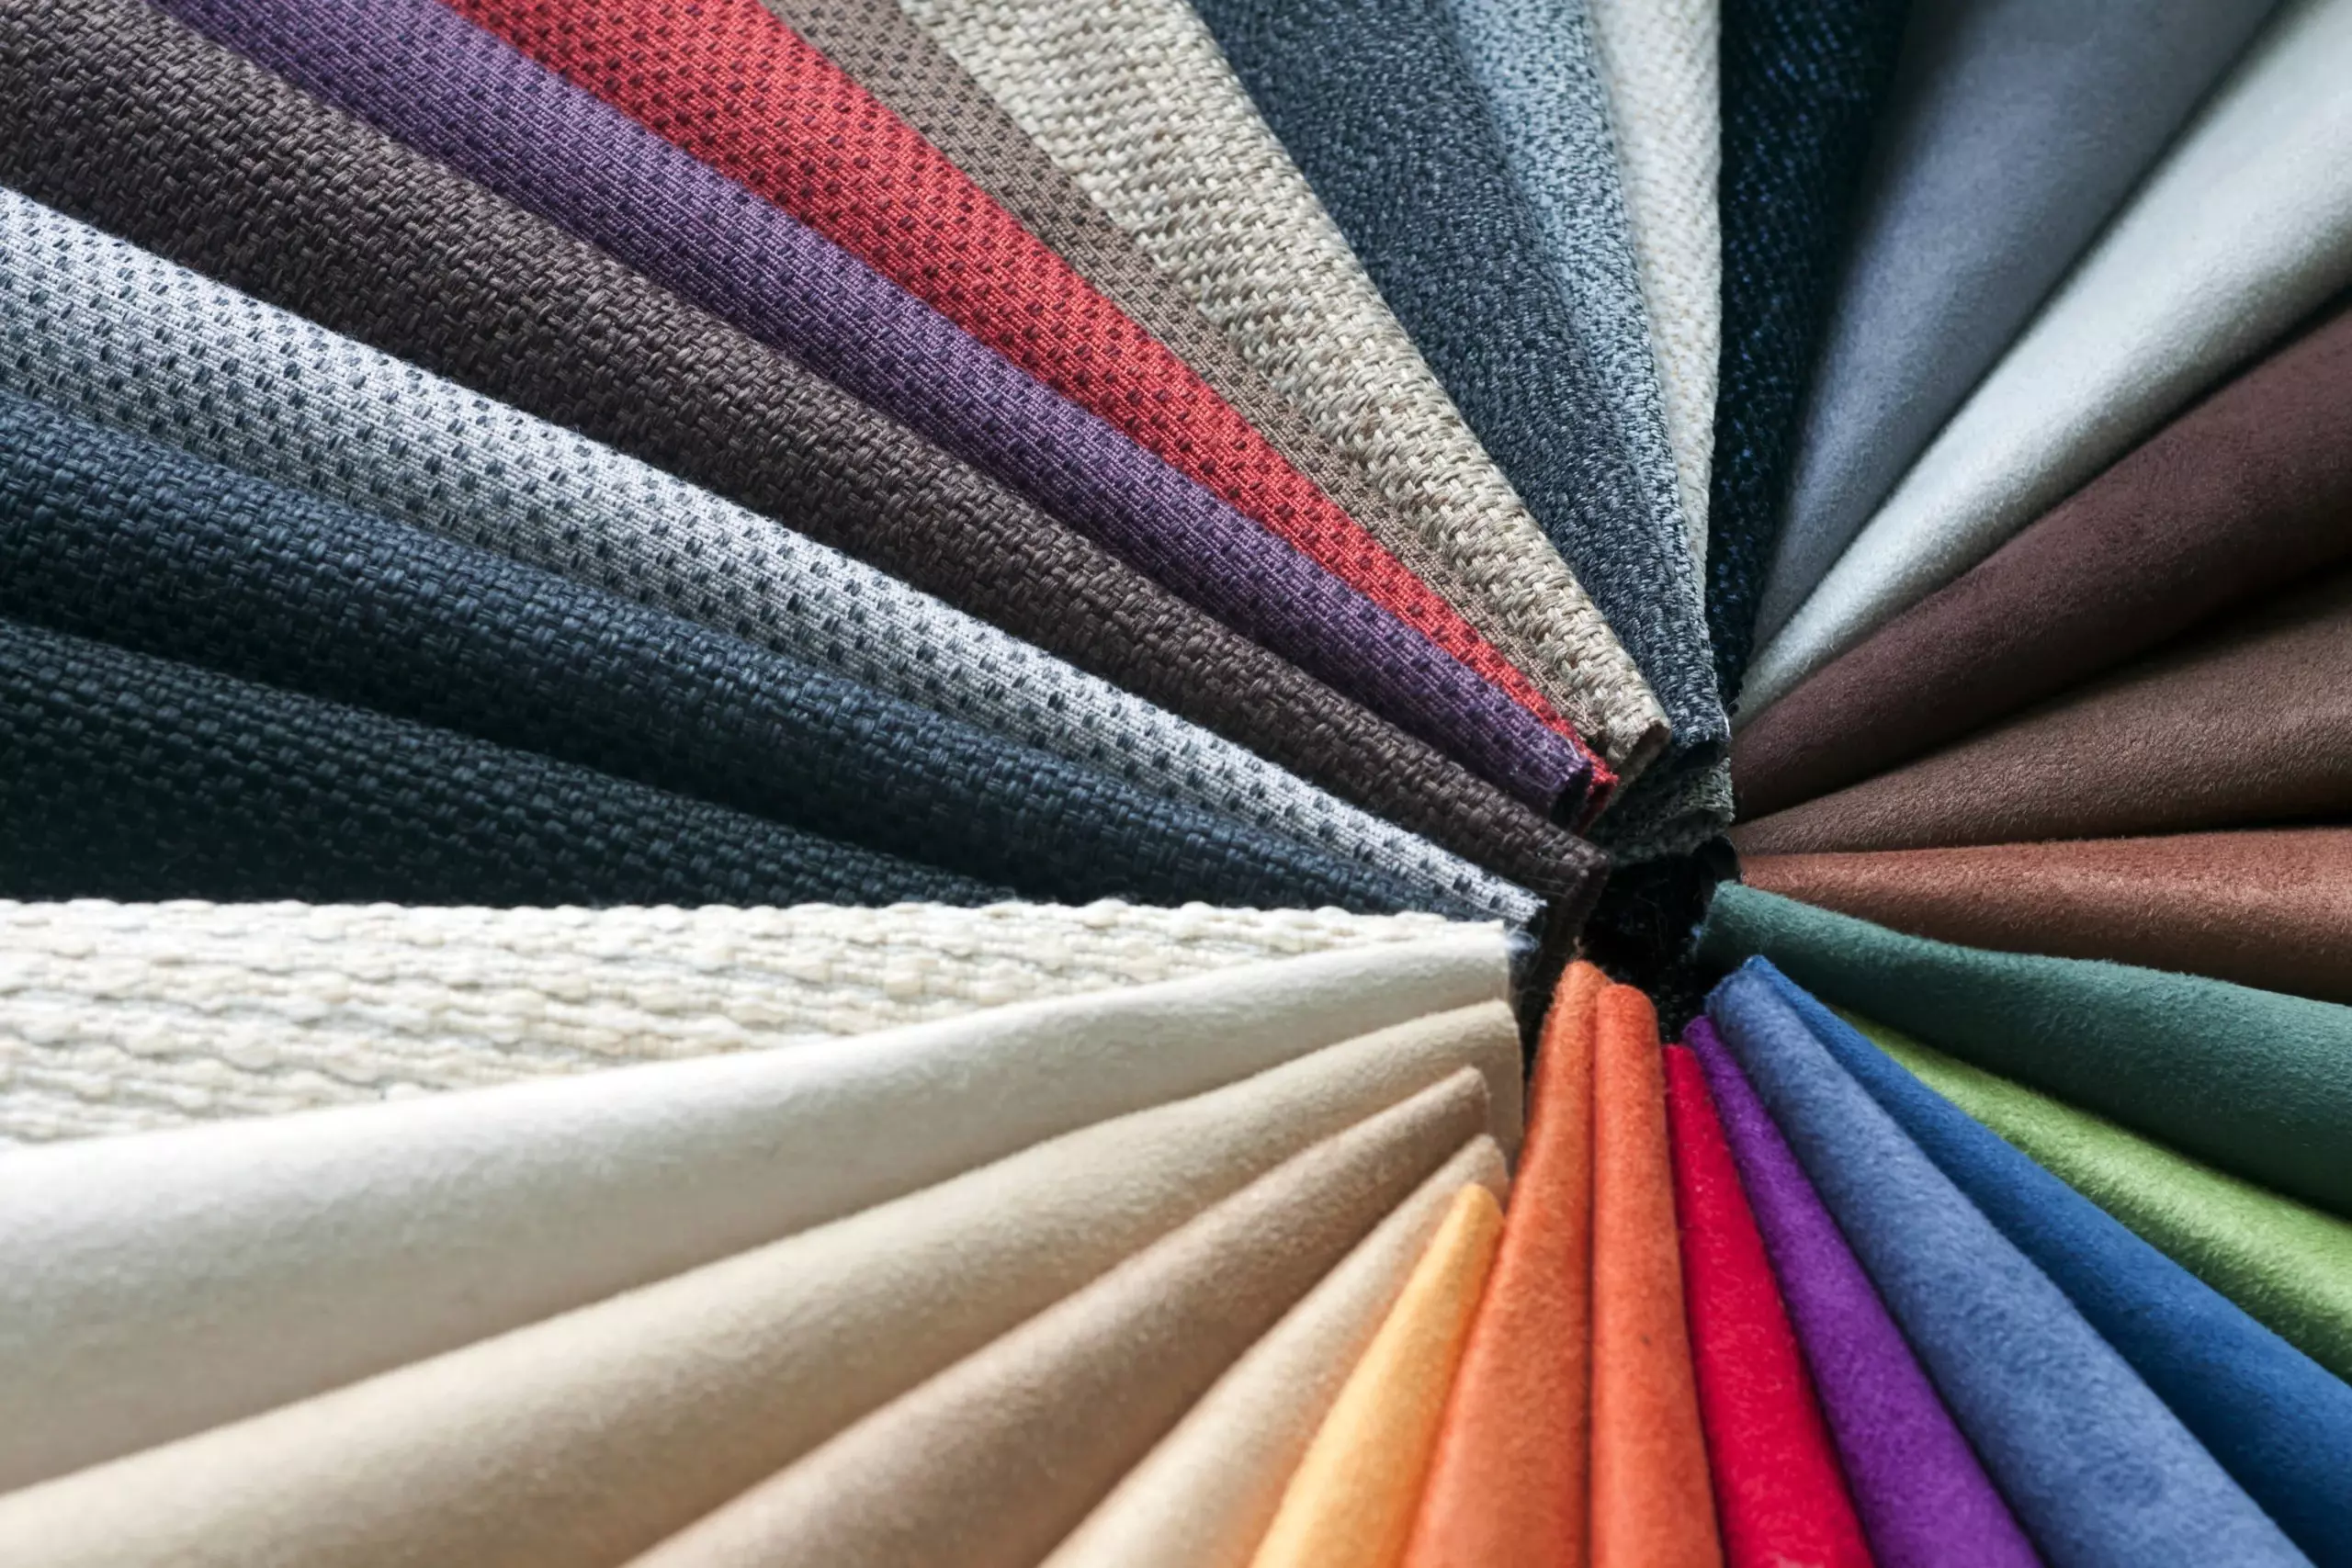 How to Pick the Best Upholstery Fabric for Furniture  Upholstery fabric  for chairs, Sofa fabric upholstery, Reupholster furniture